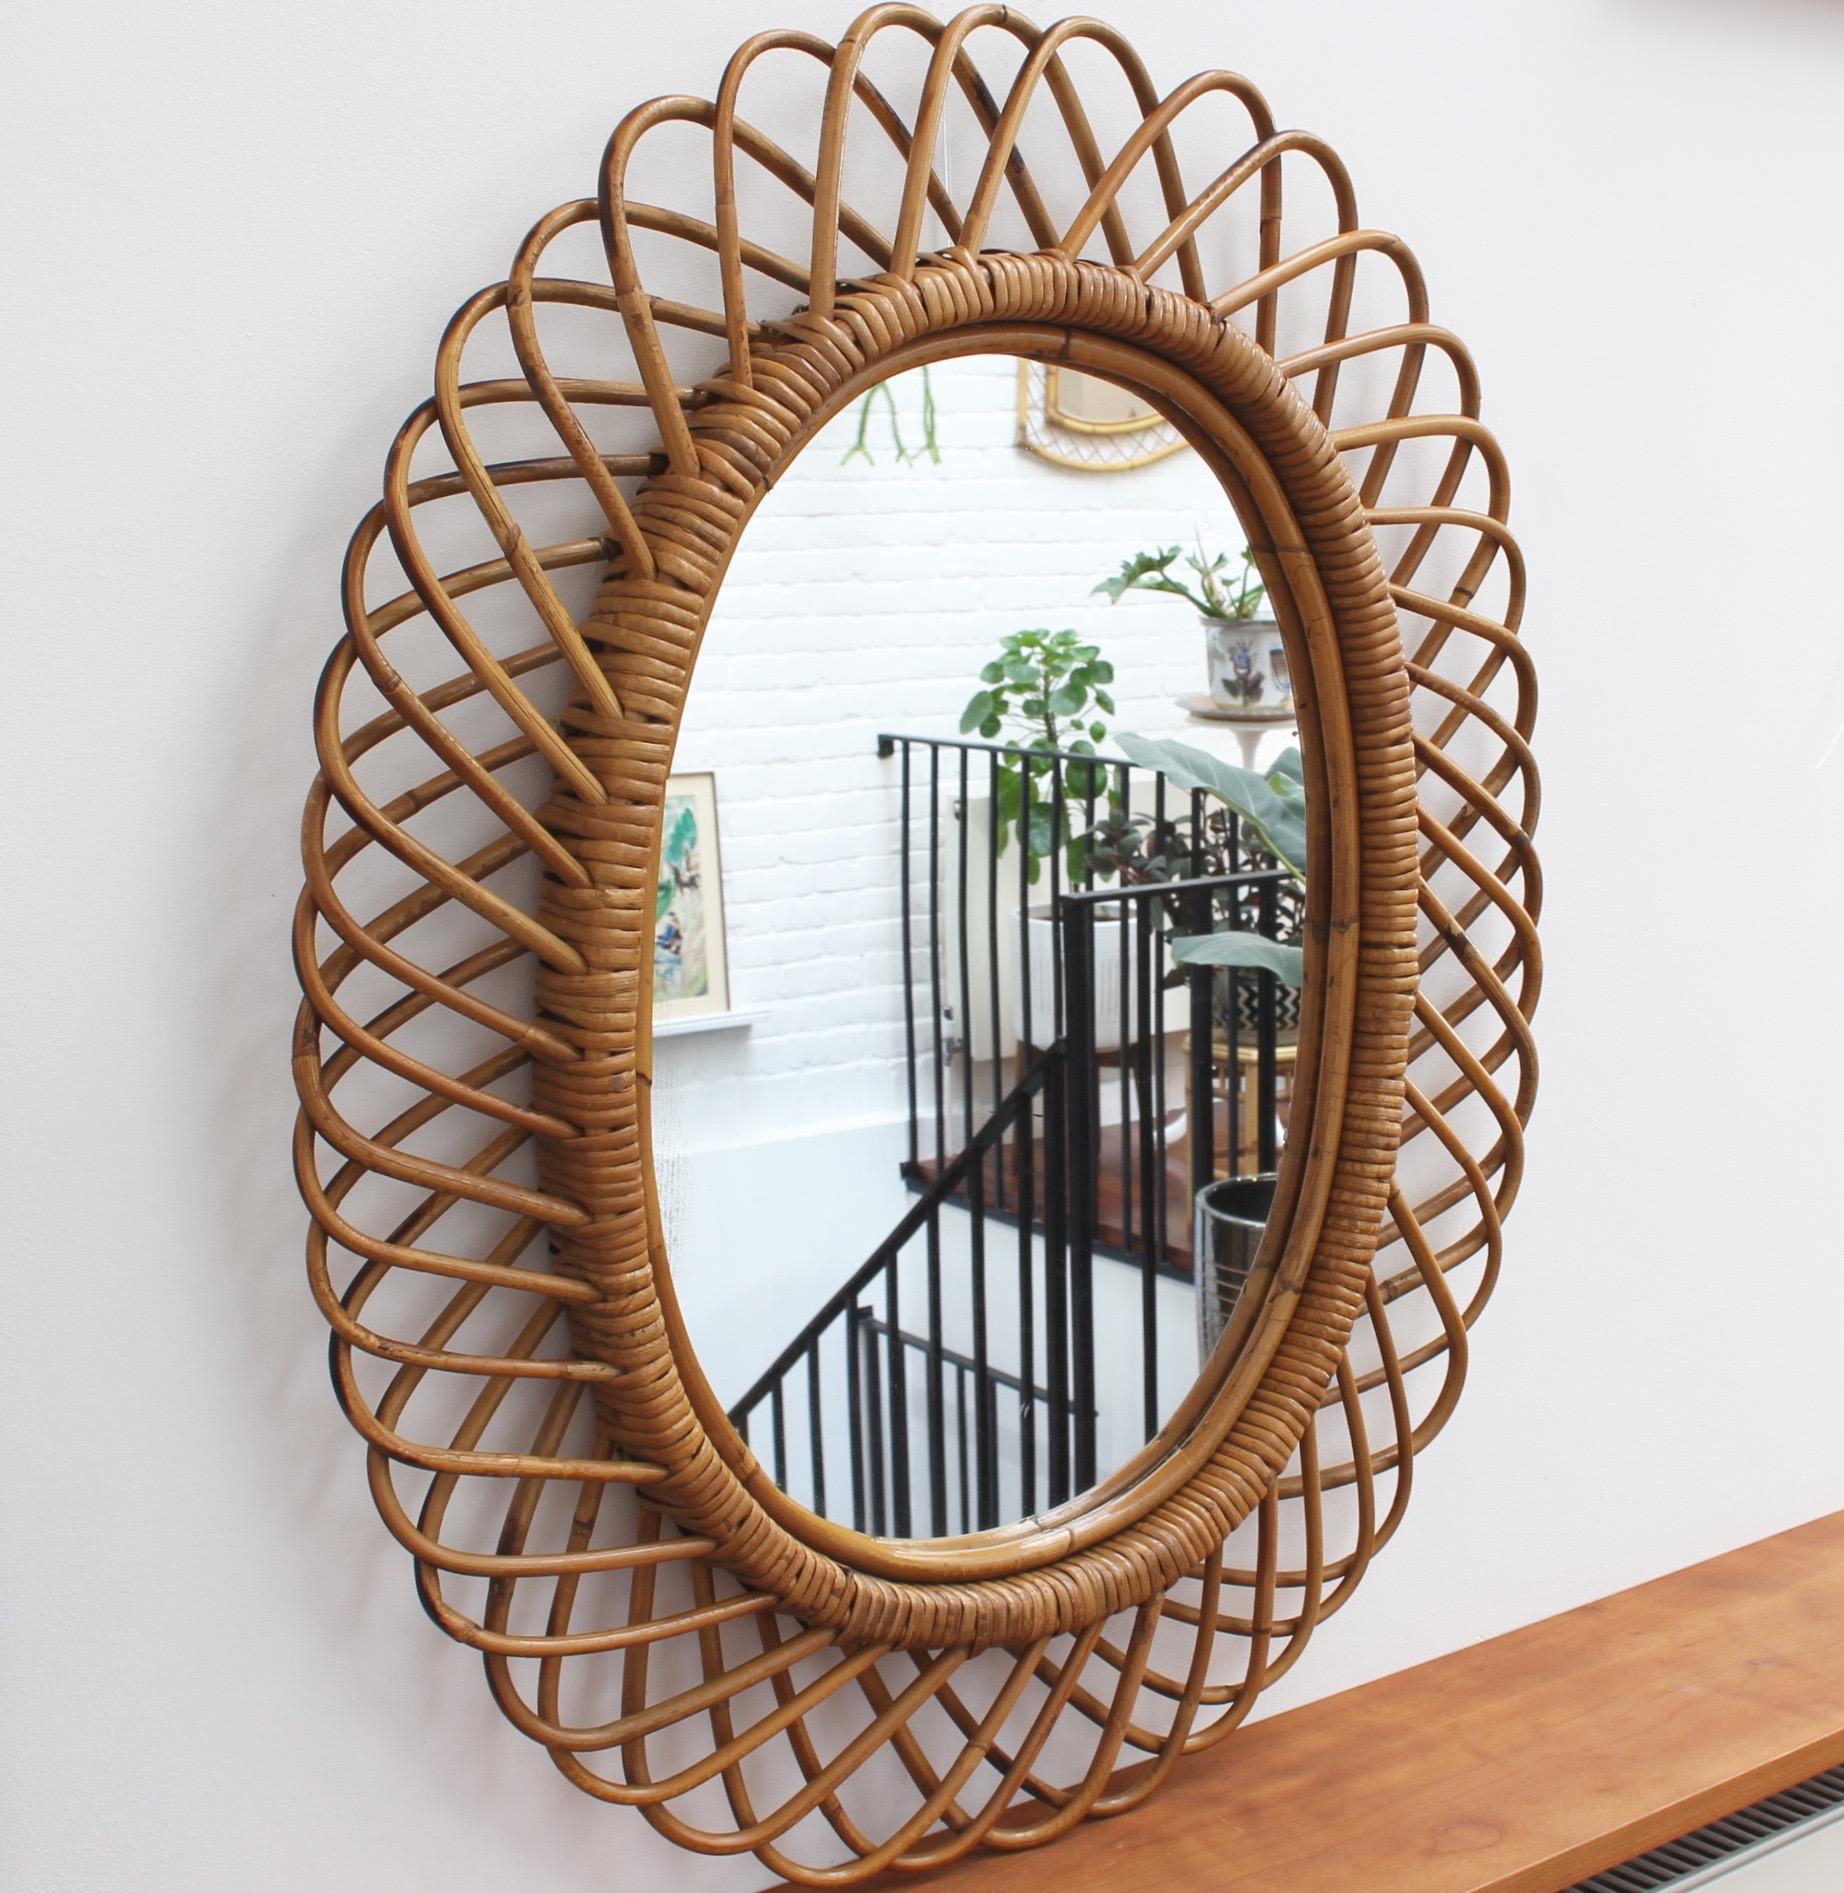 Italian rattan wall mirror, circa 1960s in the style of Franco Albini. This mirror has a complex weave of rattan in a series of horseshoe-shaped projections on the frame edge. There is a graceful, aged patina on the mirror frame and some blemishes